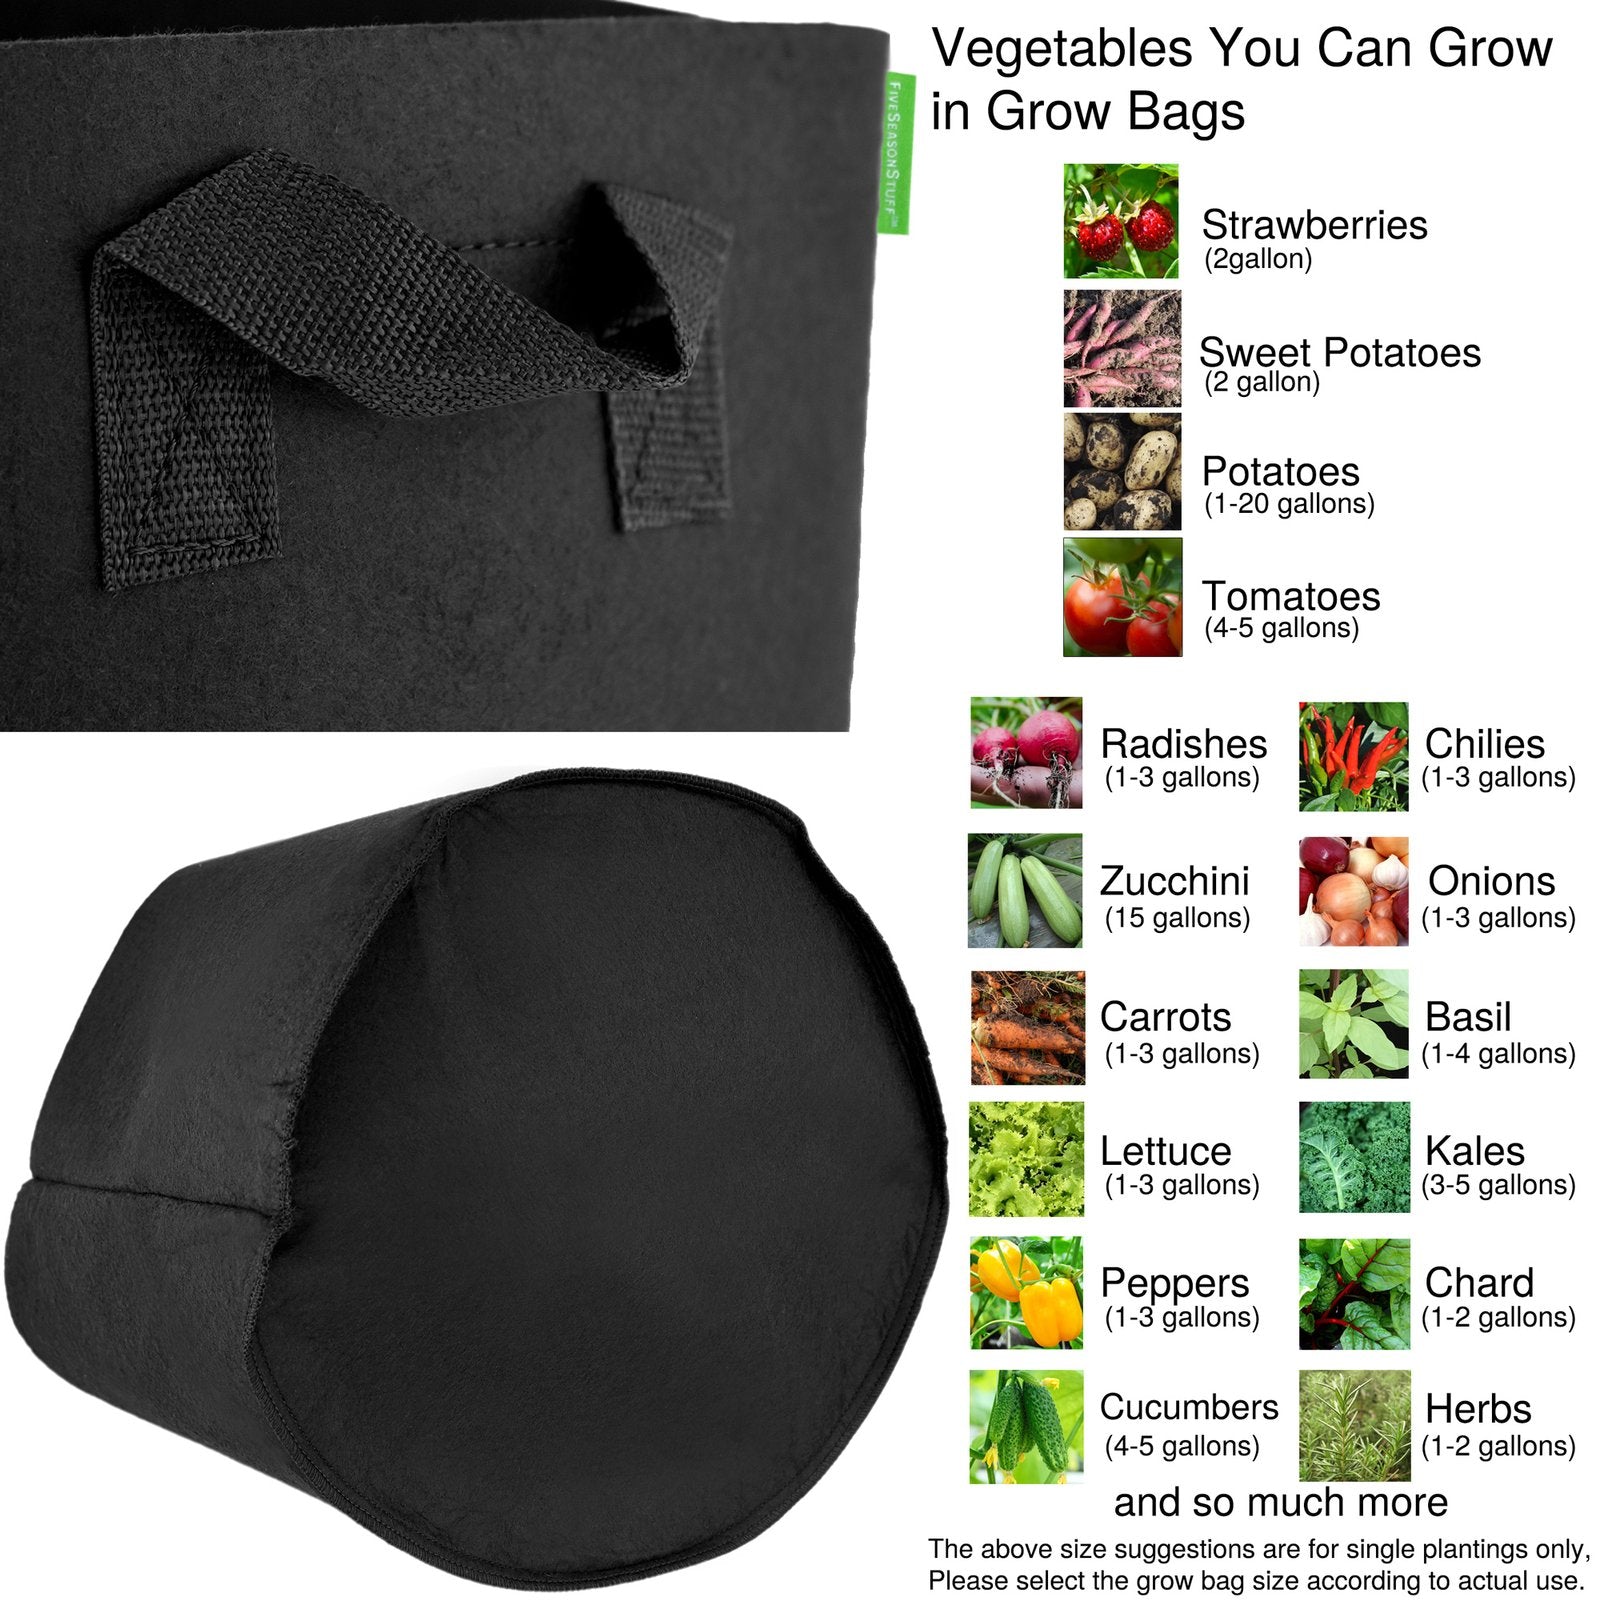 9 Pack 7 Gallons Grow Bags - Breathable Fabric Pots for Healthier Plants Vegetables Flowers – Heavy Duty Thick Containers with Sturdy Handles - Aeration Planters for Smart Gardening (Black)